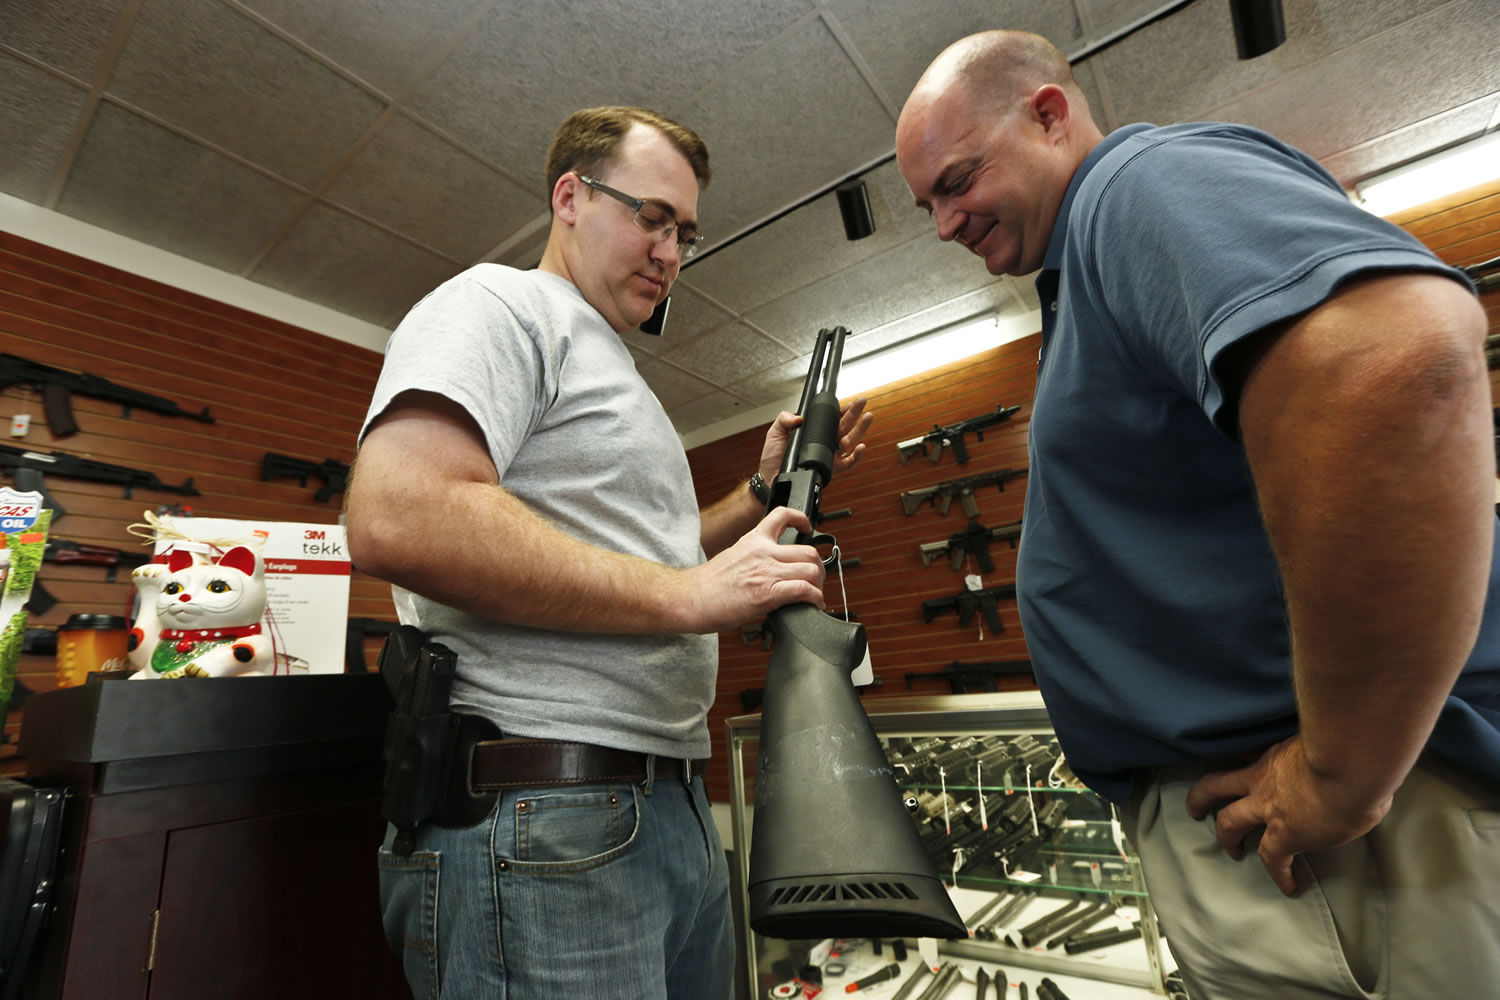 Black Weapons Armory store owner Tommy Rompel, left, shows former mayoral candidate Shaun McClusky a shotgun at the Tucson, Ariz., store on Thursday.